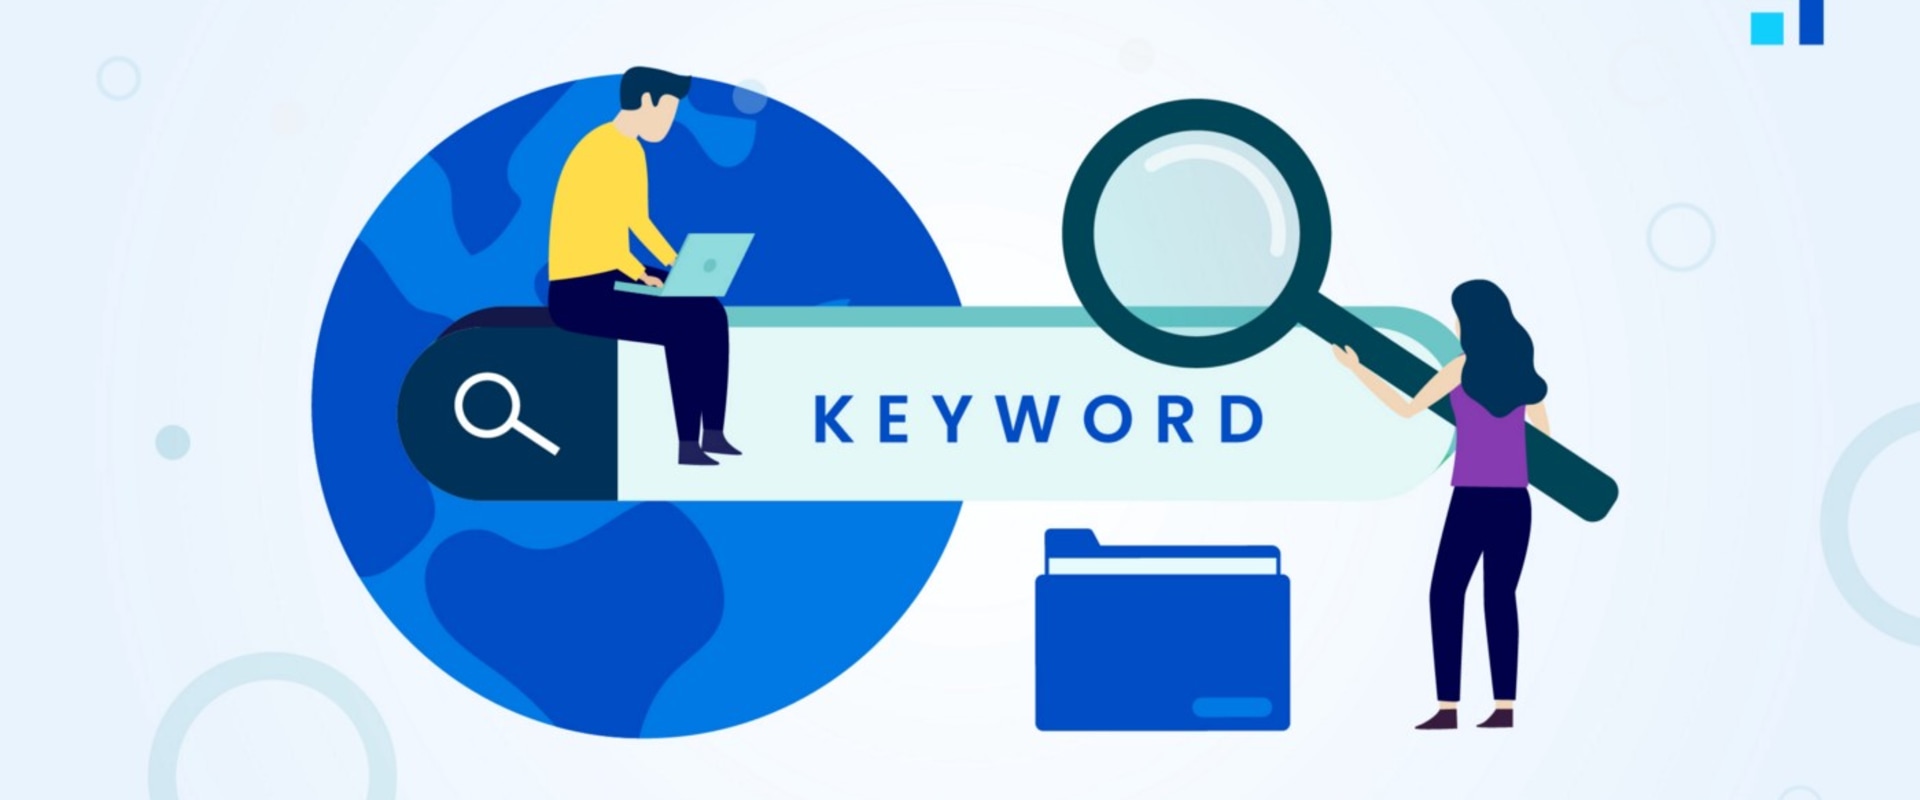 Is keyword research the same as seo?